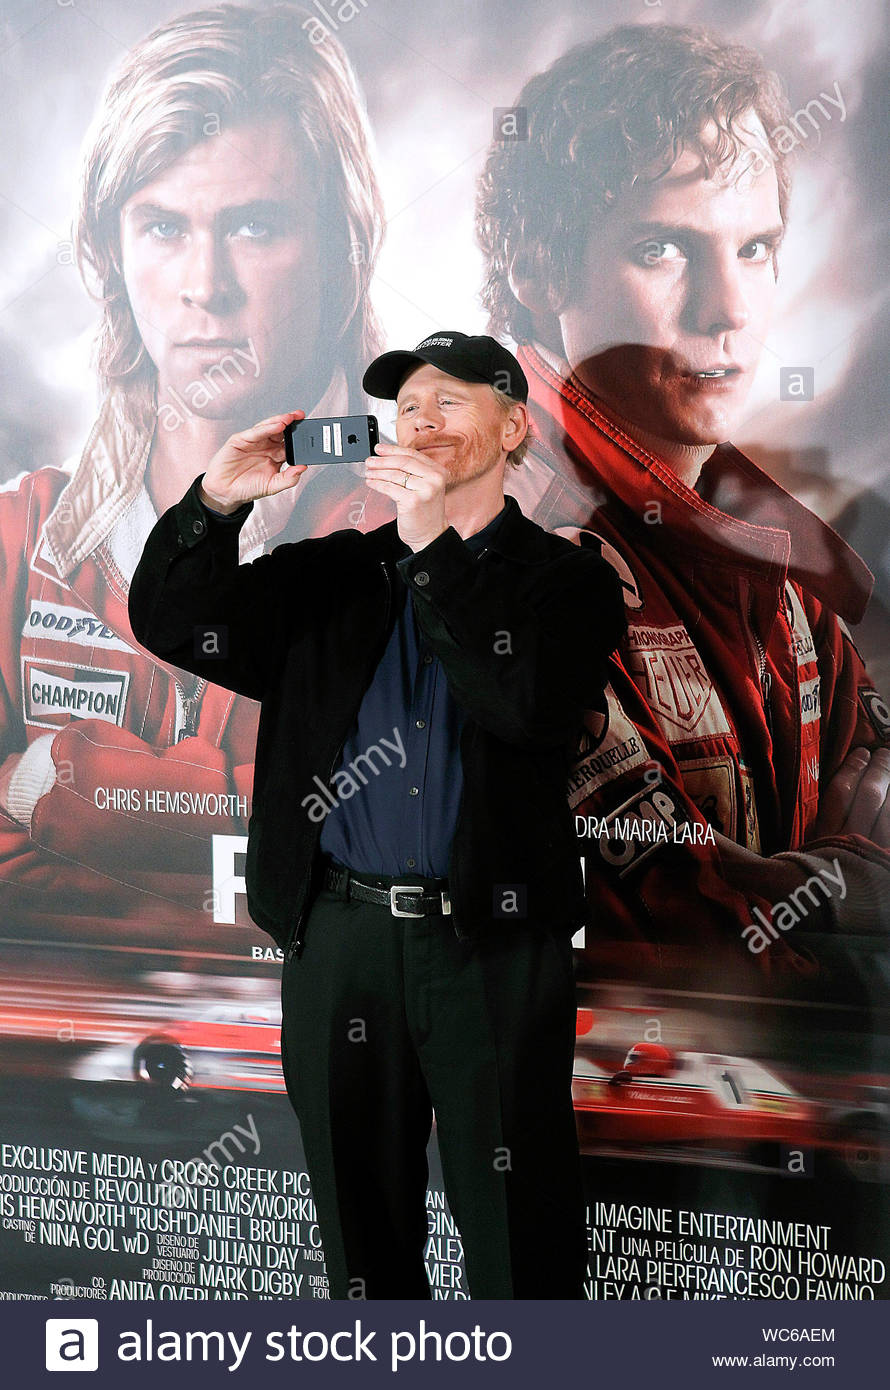 Madrid, Spain - Film director Ron Howard and Actor Daniel Bruhl attends the  spanish Photo Call for the movie "RUSH". AKM-GSI, August 19, 2013 Stock  Photo - Alamy